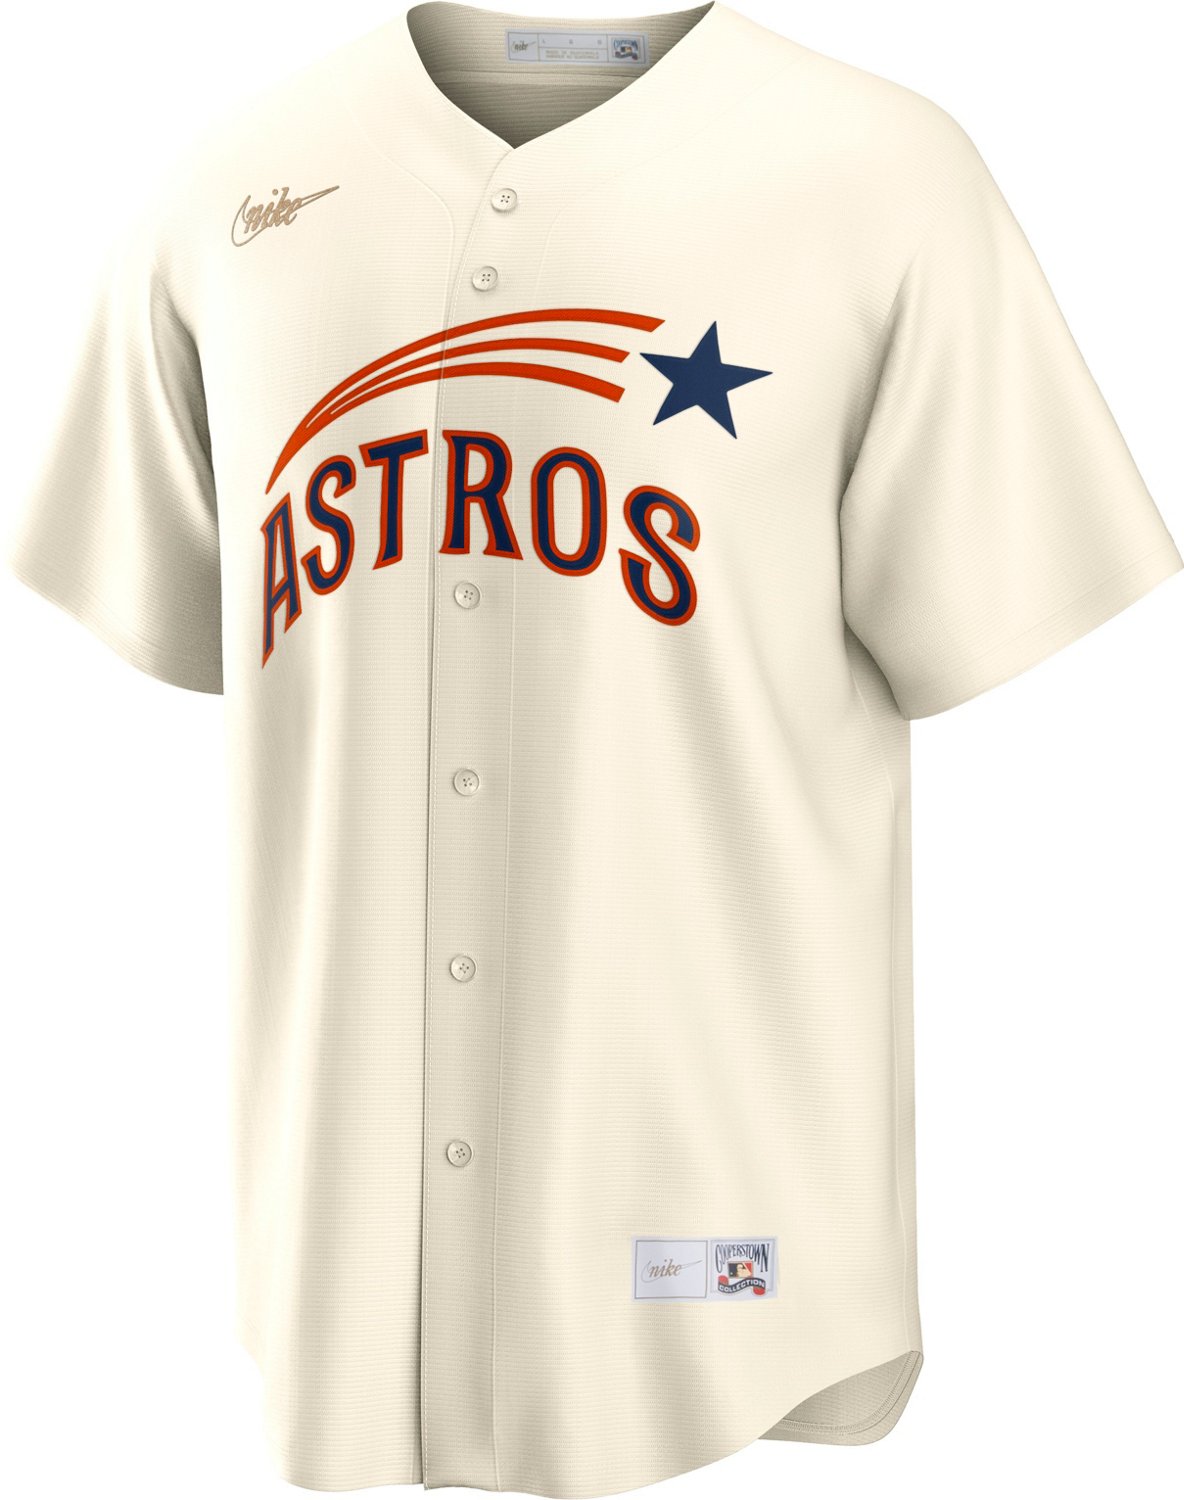 Nike Men's Houston Astros Official Cooperstown Jersey